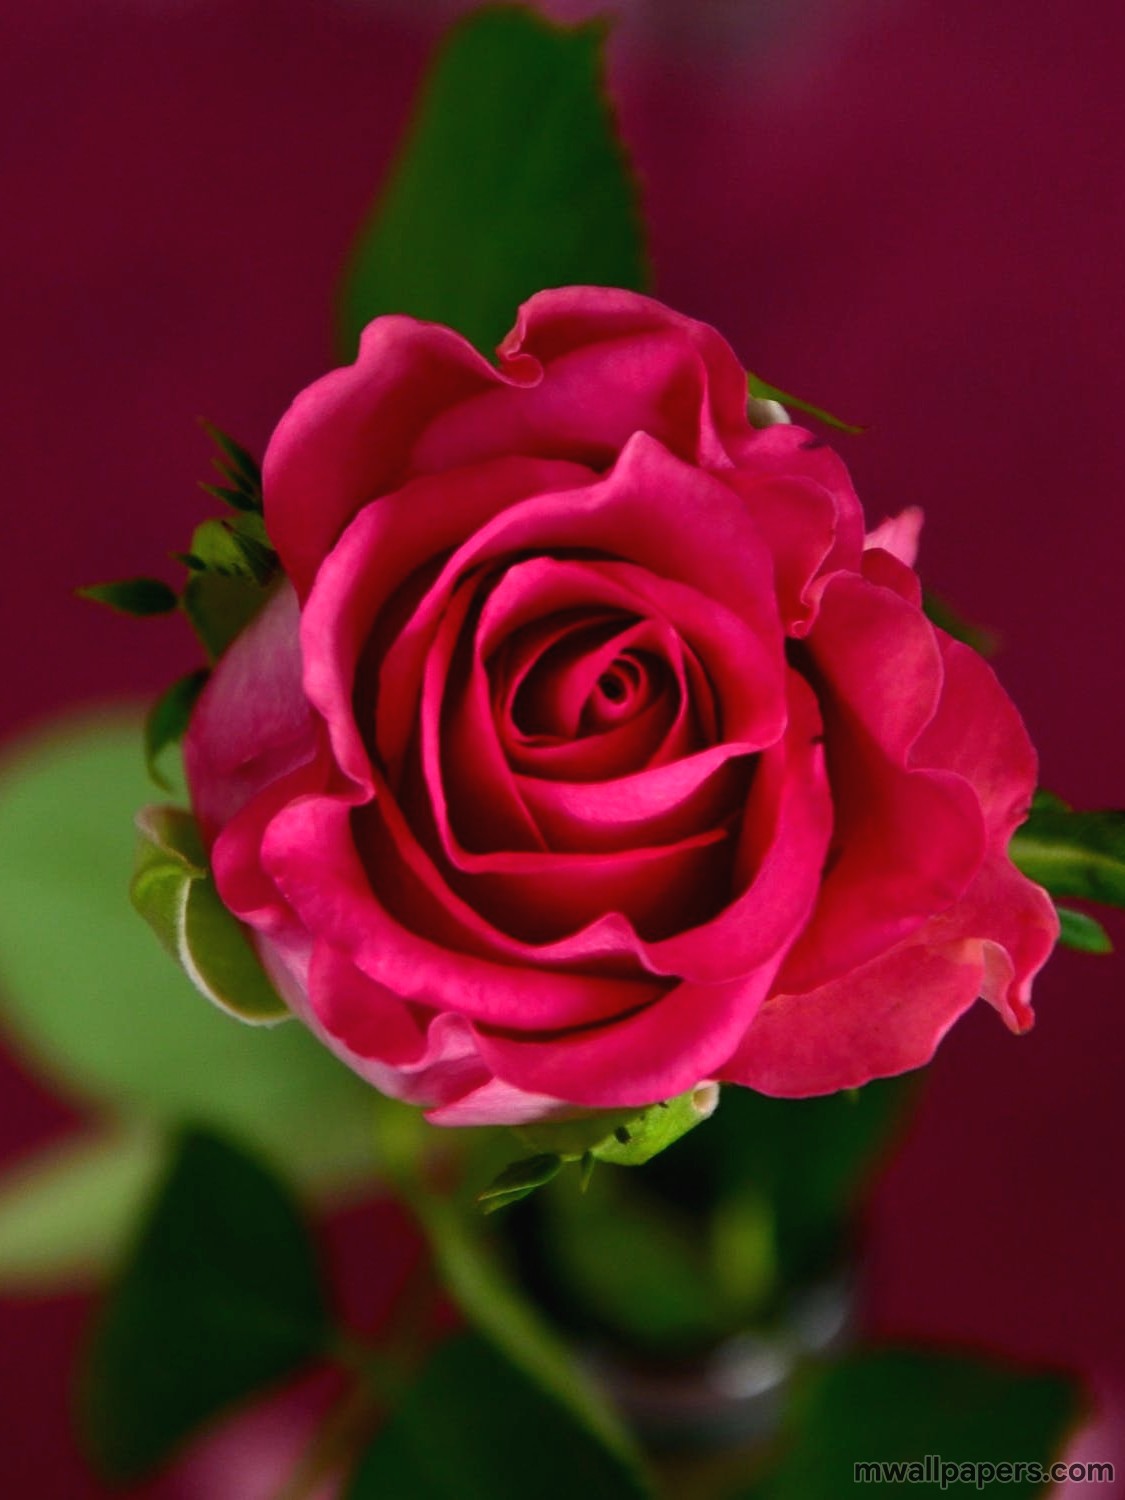 Free download Red Rose Hd Images And Wallpapers Red Rose Hd Flower